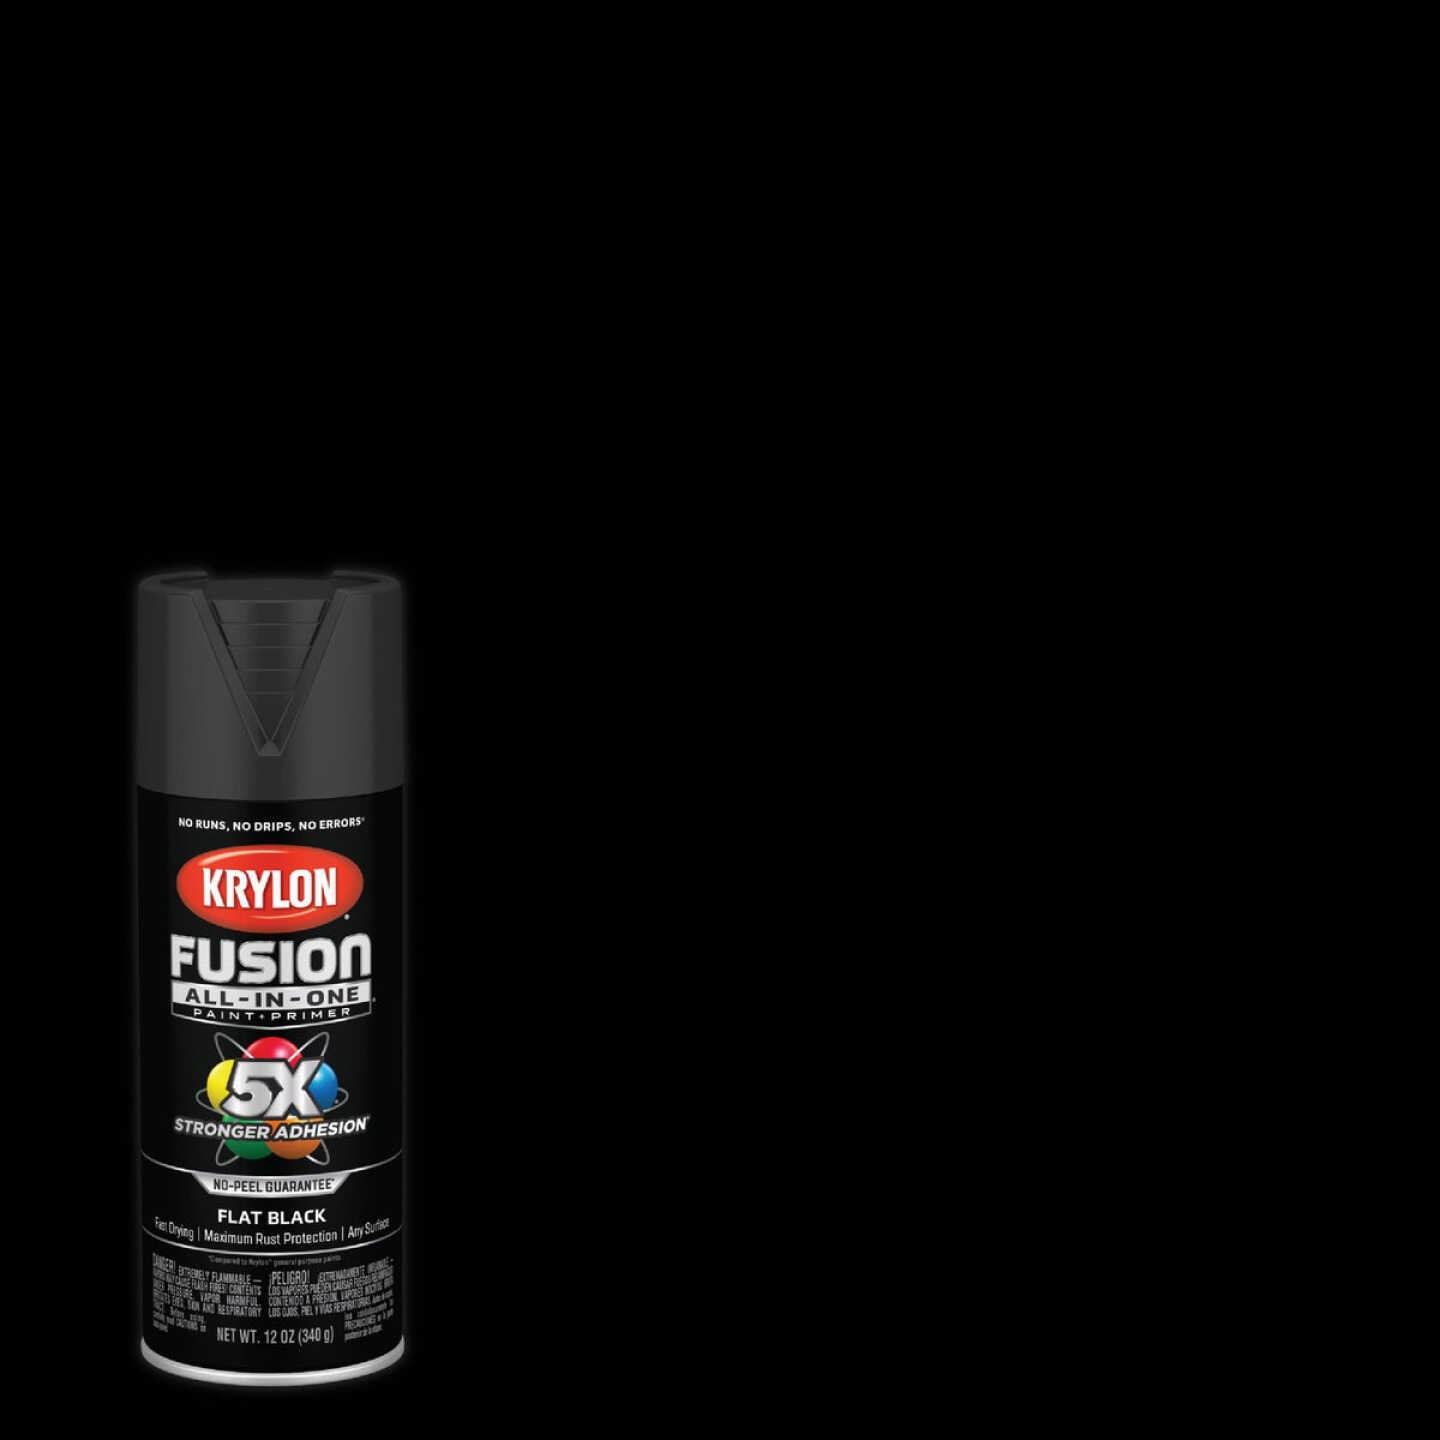 Krylon Fusion All-In-One Textured Spray Paint & Primer, Black - Connolly's